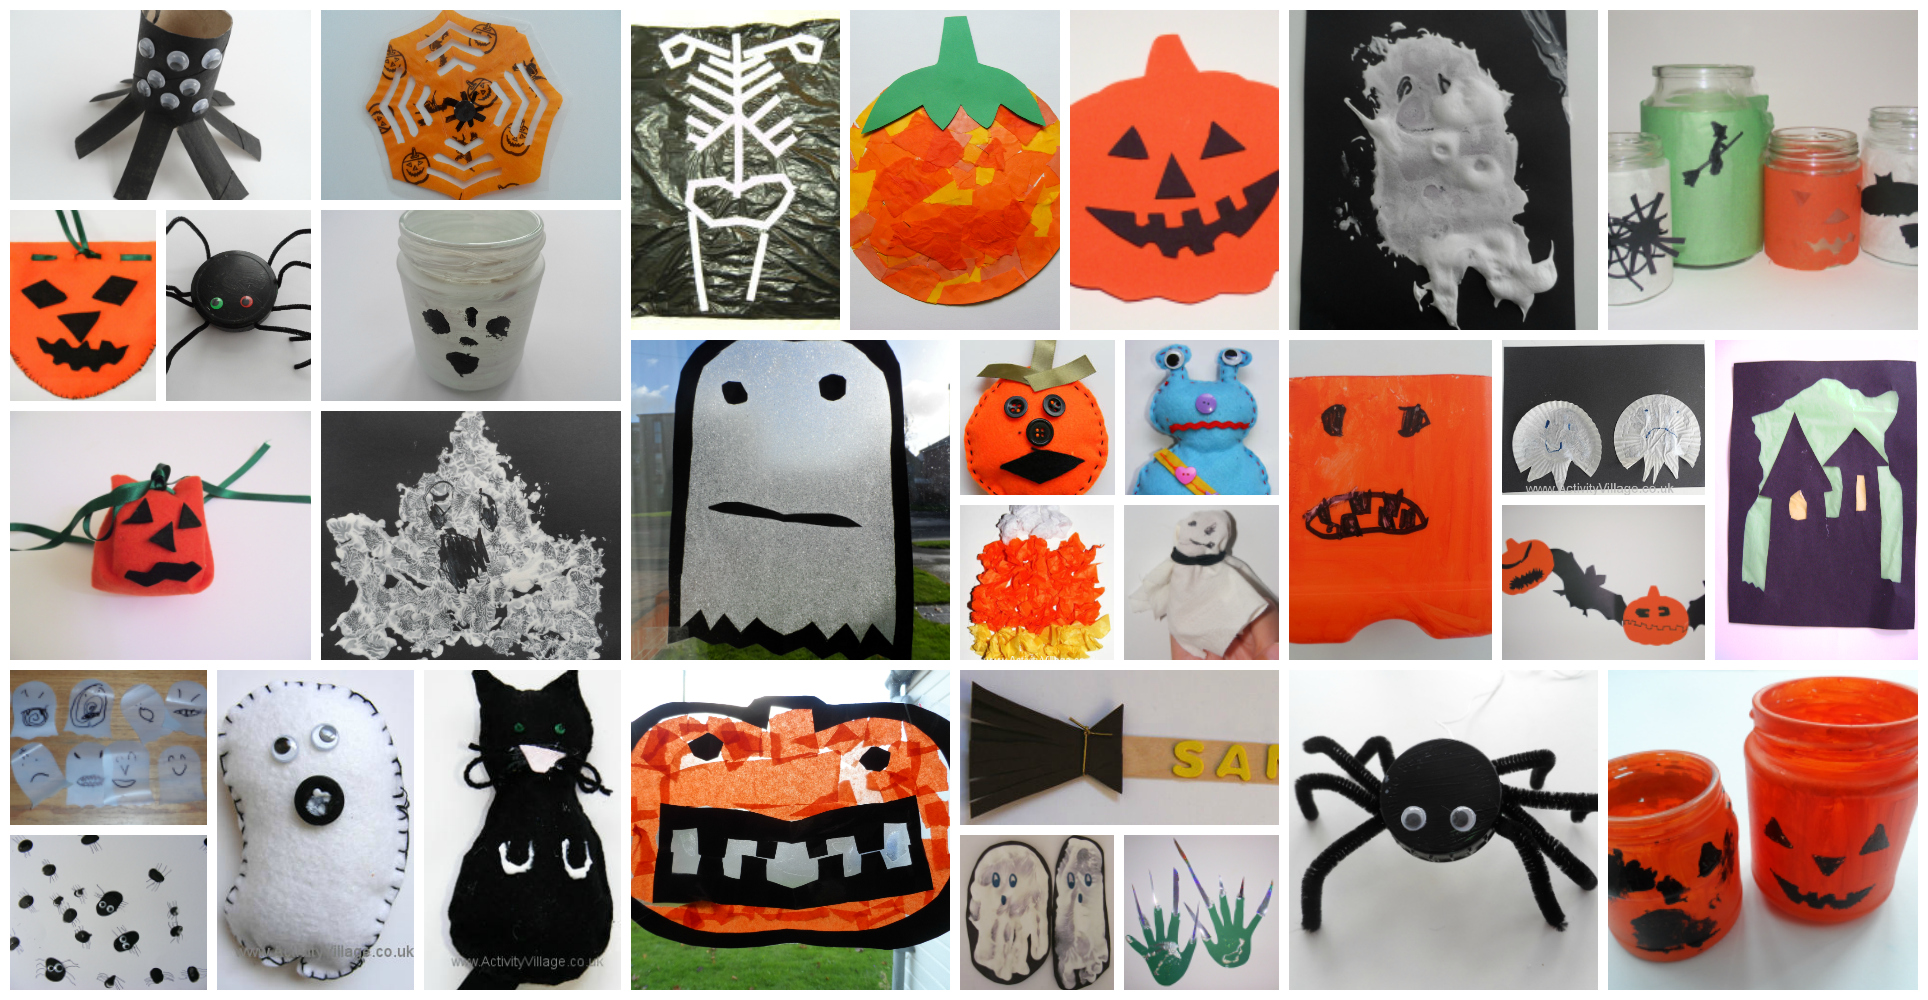 Just a Small Selection of our Halloween Crafts!